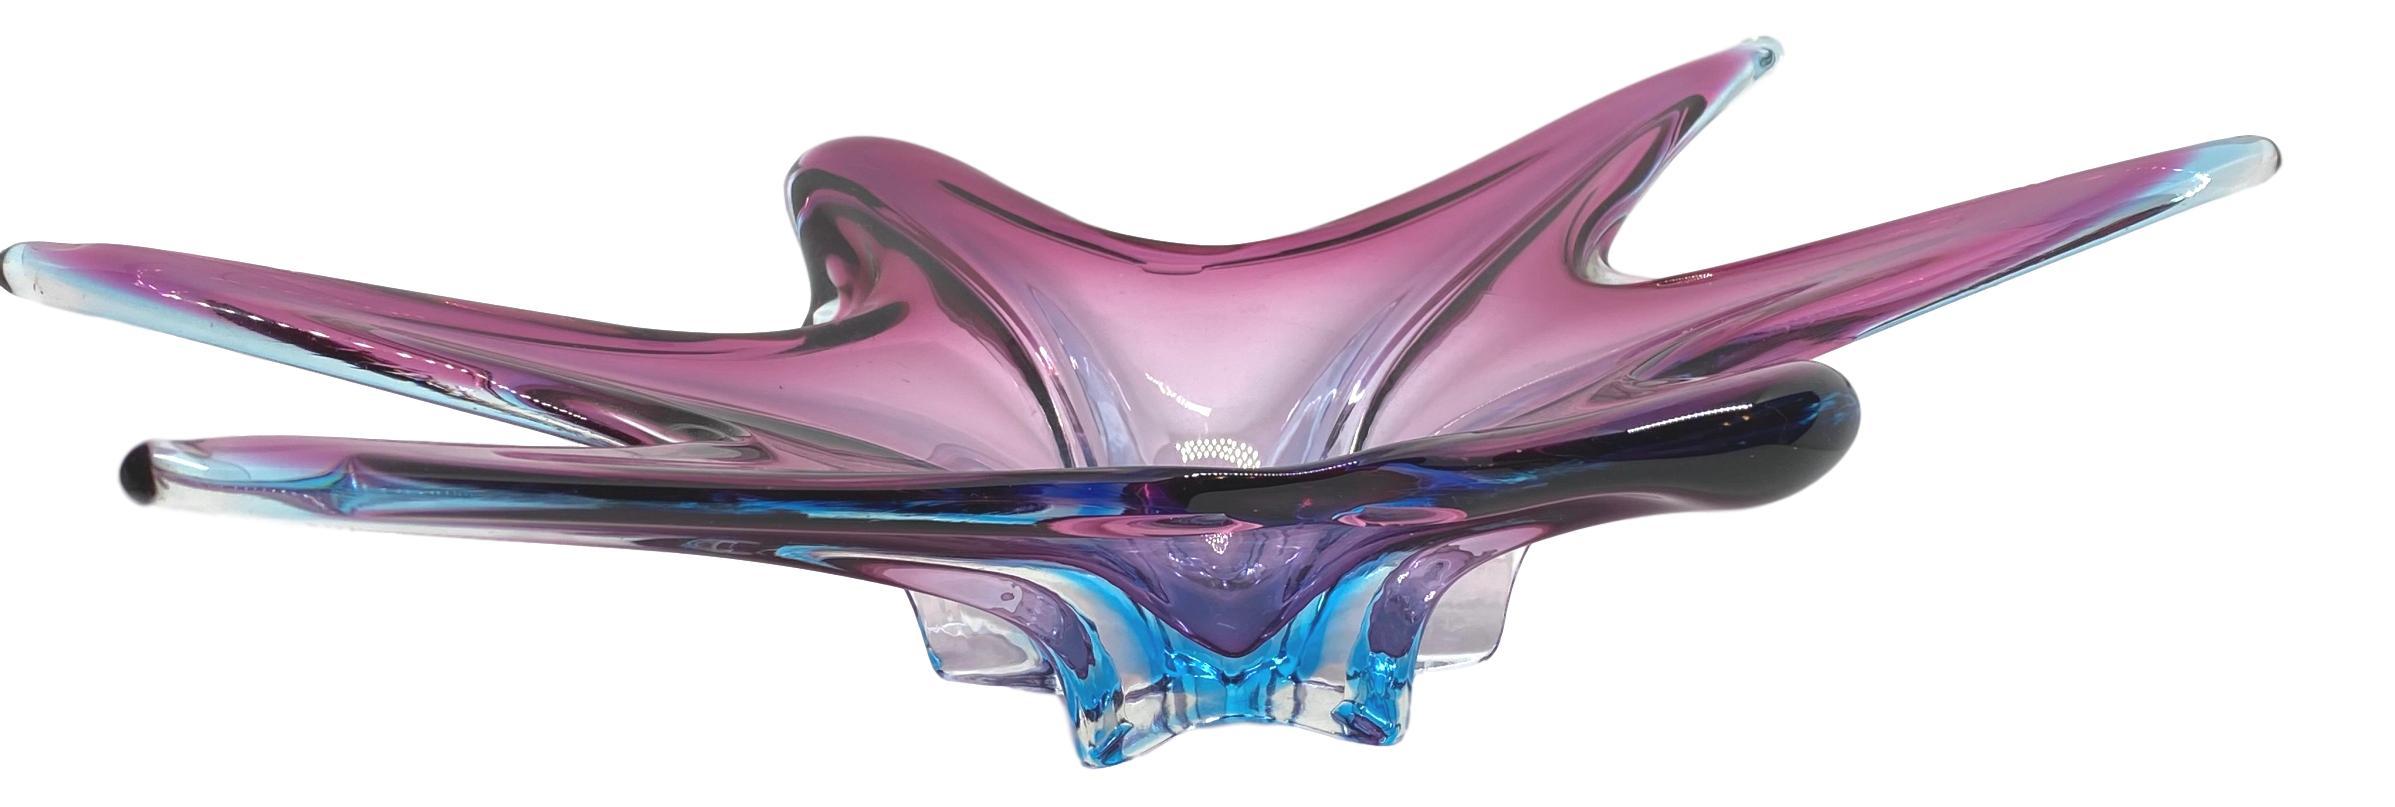 Mid-Century Modern Murano Art Glass Sommerso Bowl Catchall Purple and Blue Vintage, Italy